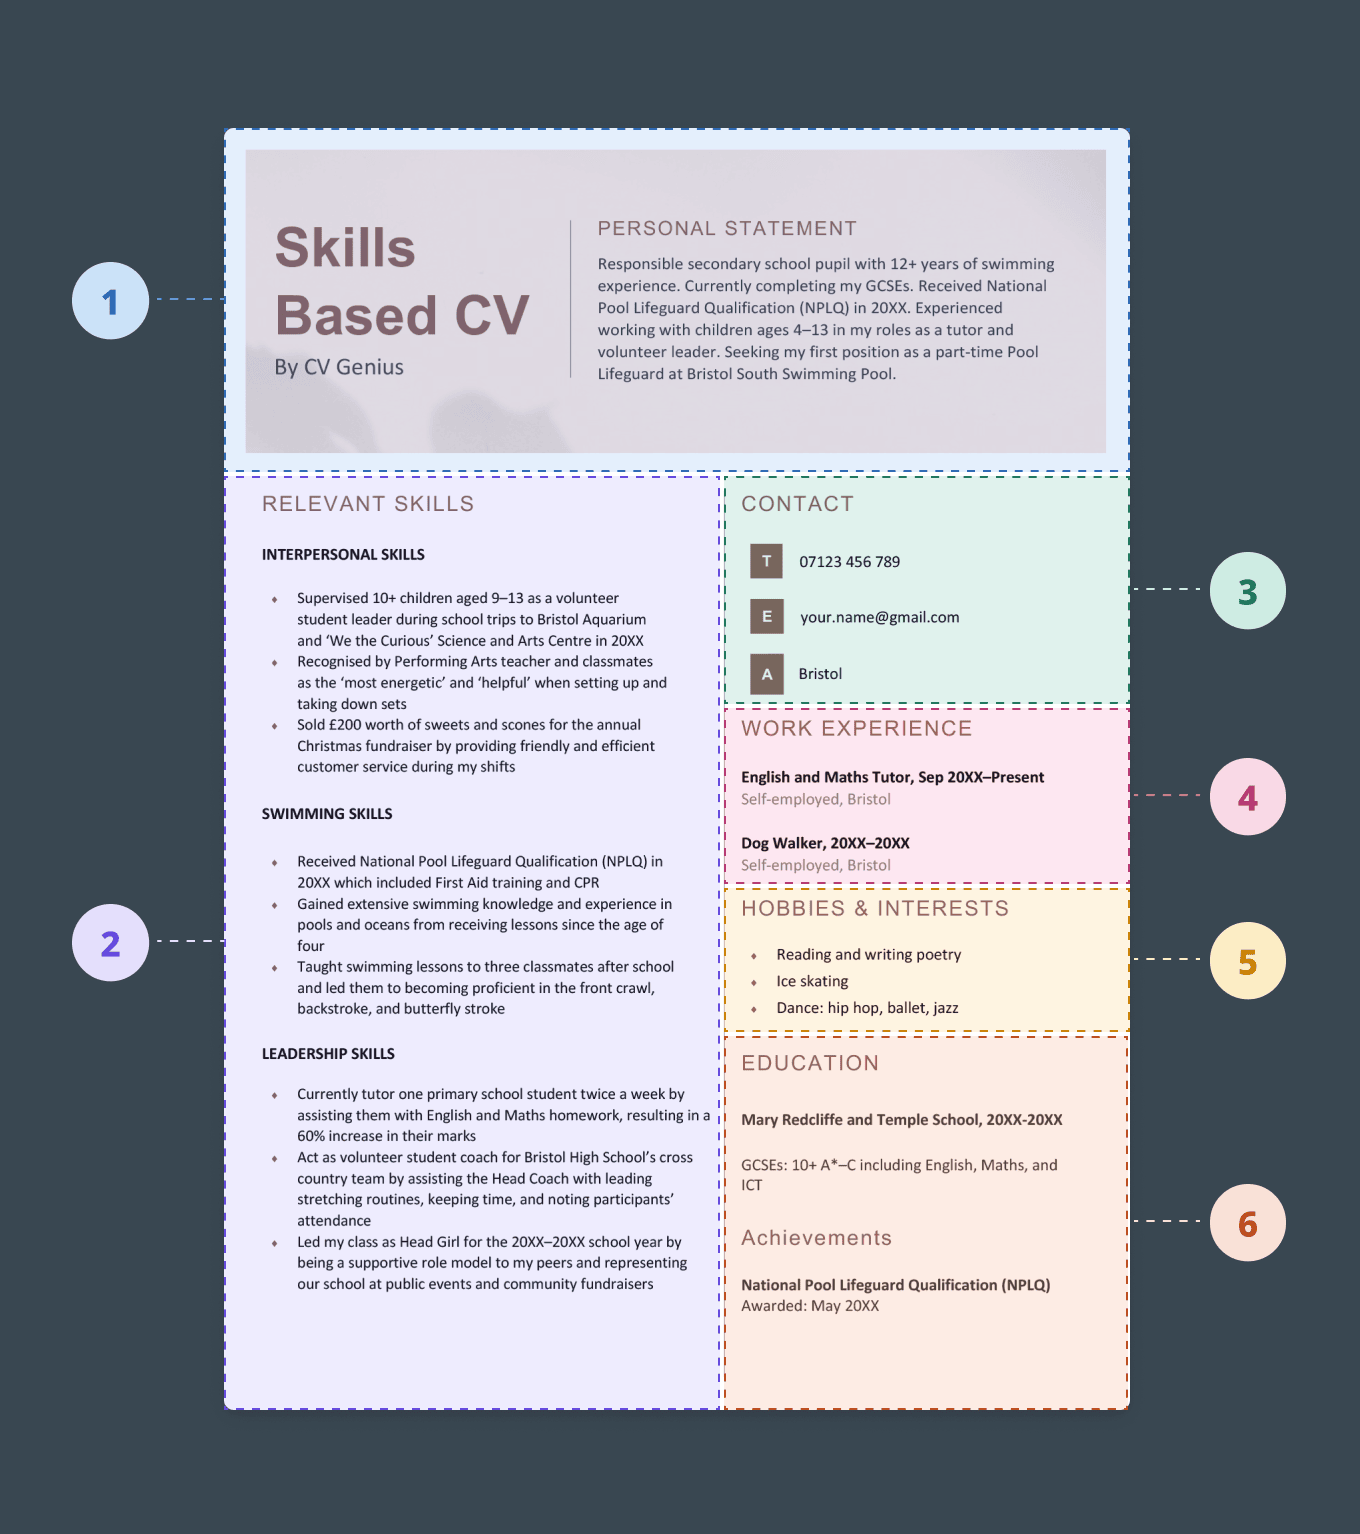 An example of a skills based CV format